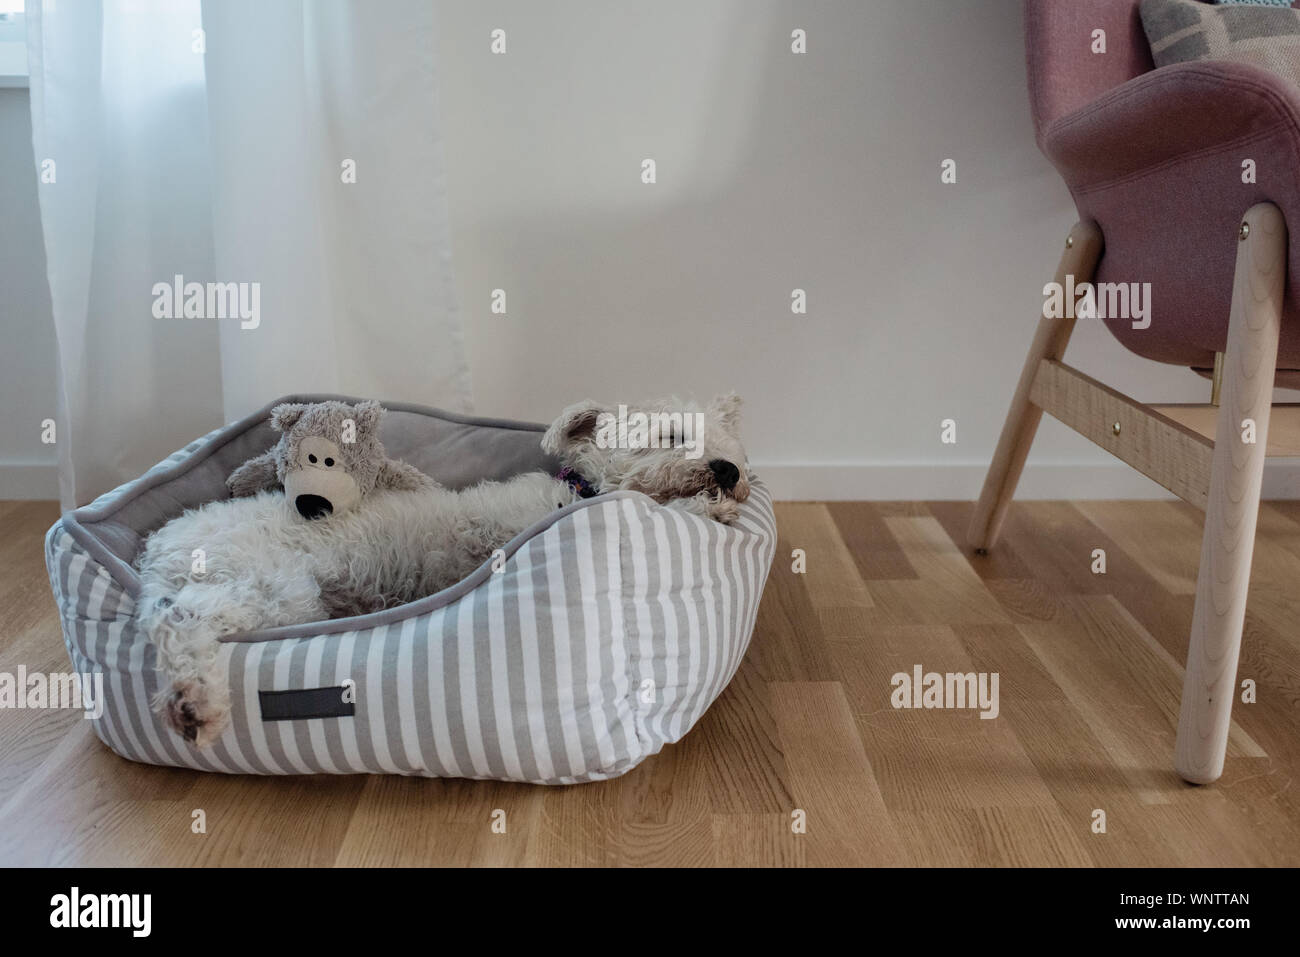 white dog curled up in a dog bed sleeping indoors at family home Stock Photo